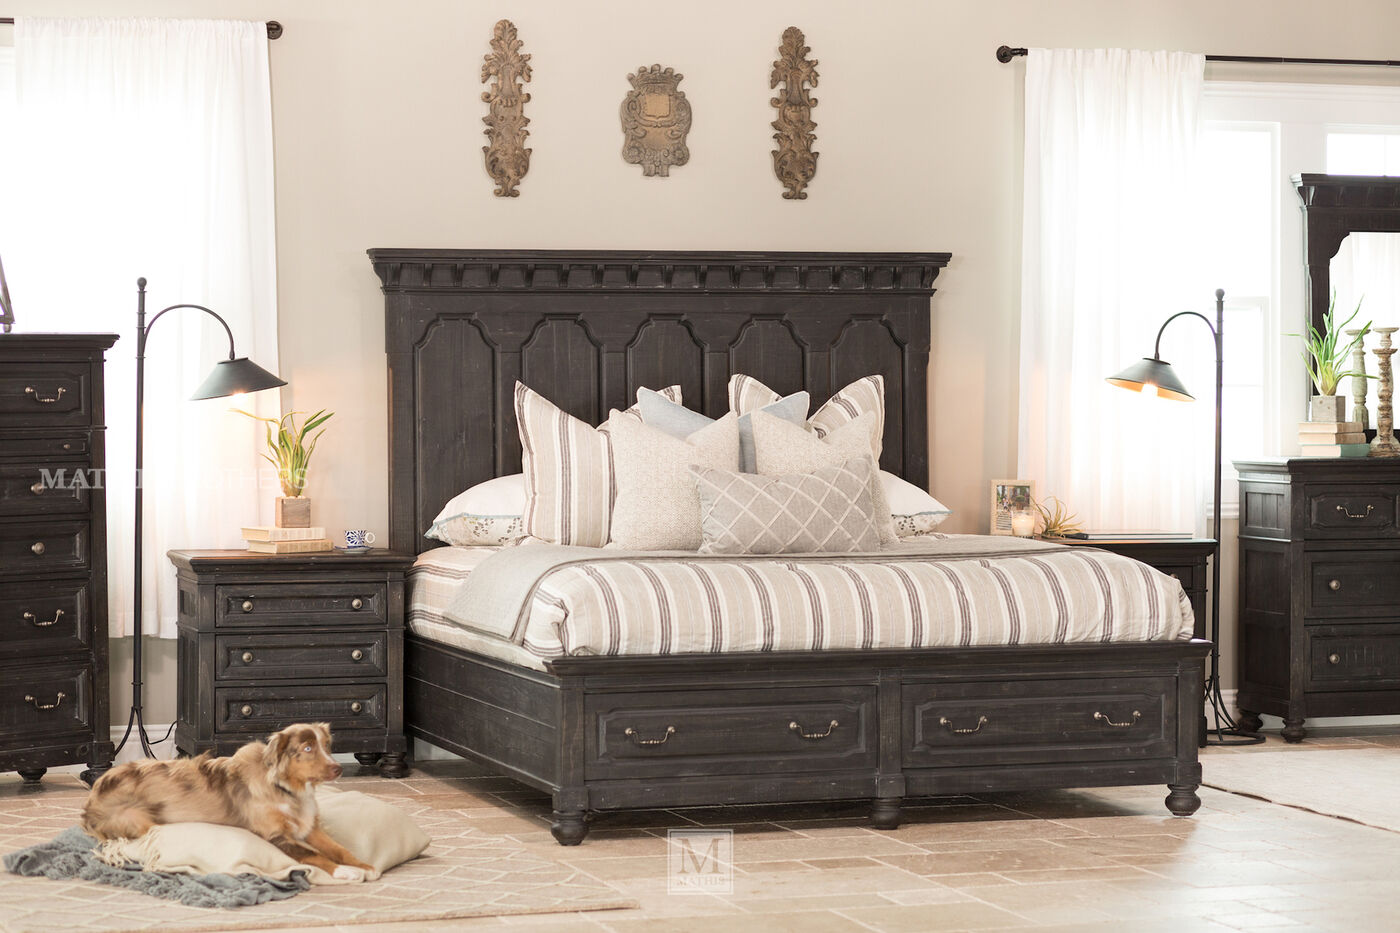 Four-Piece Distressed Bedroom Set in Black | Mathis ...